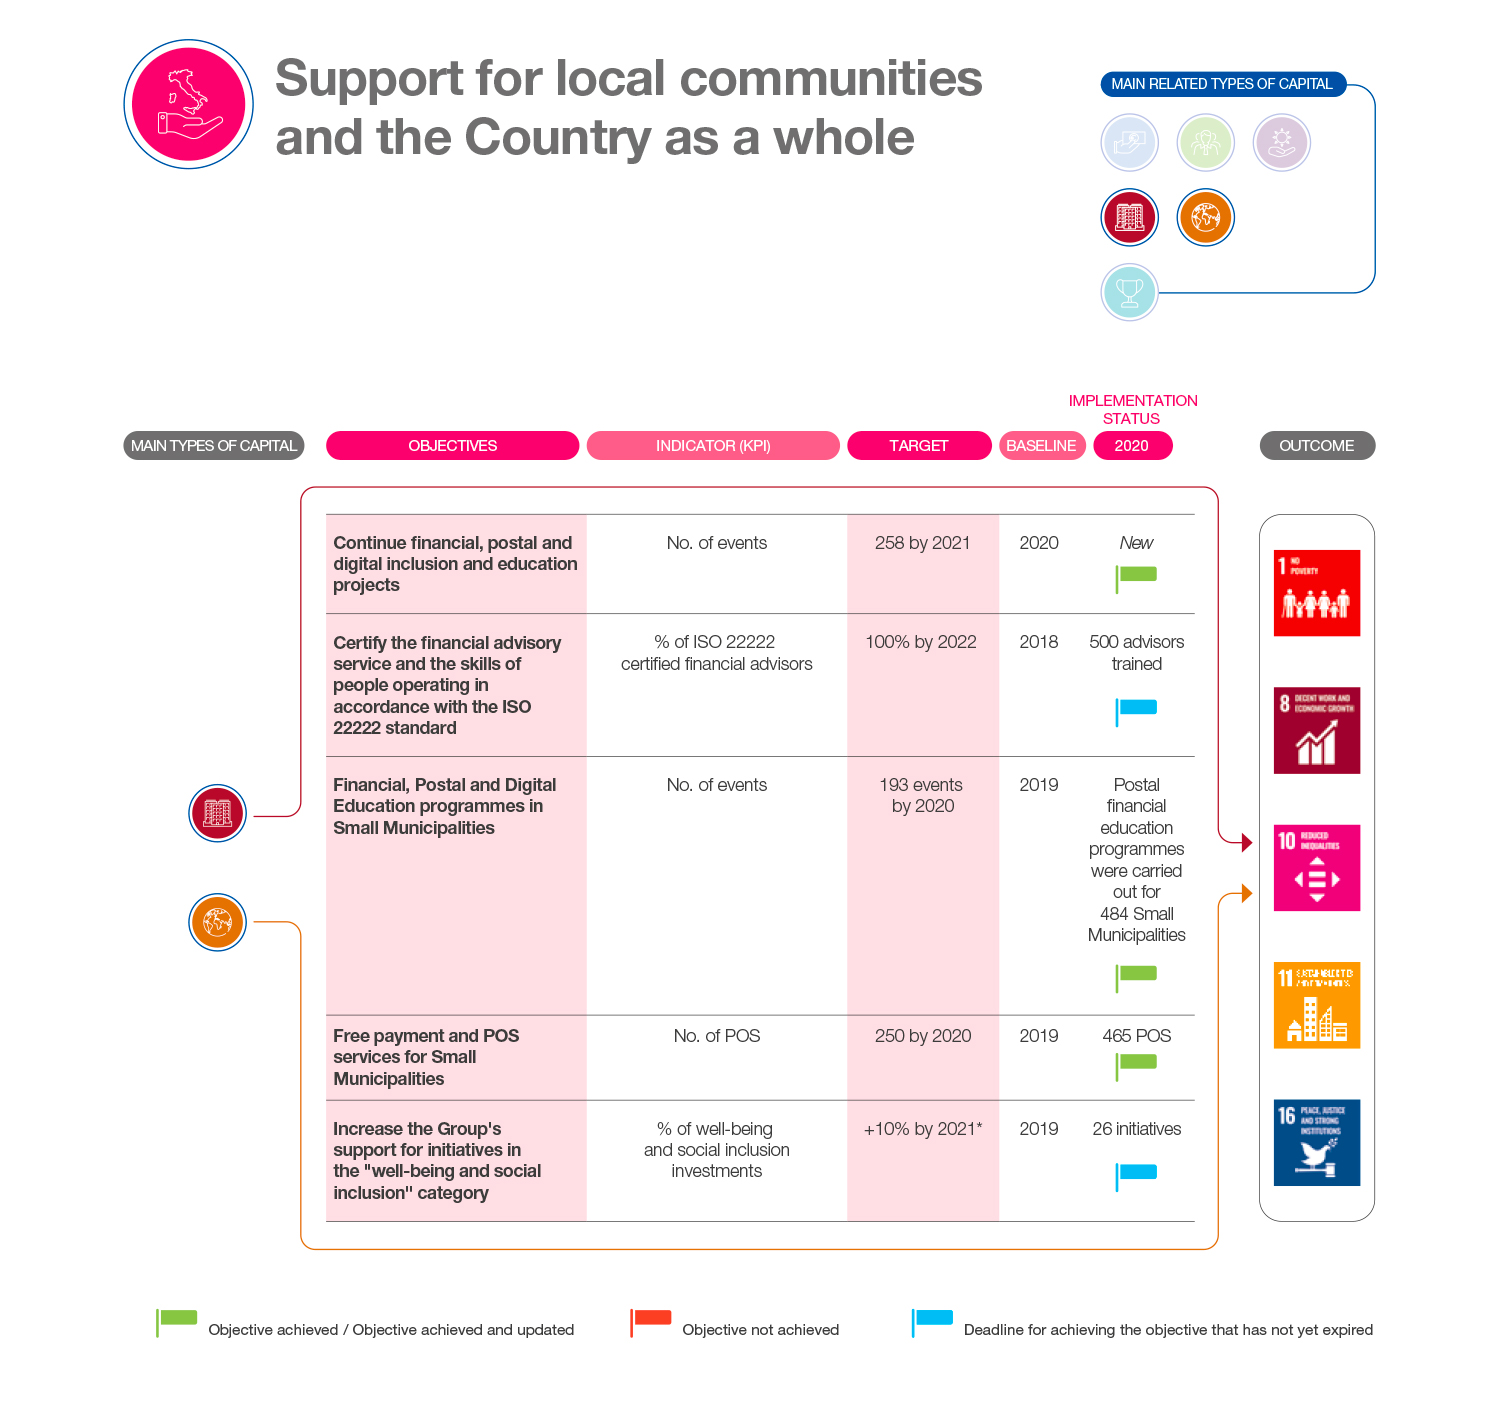 Support for local communities and the country as a whole